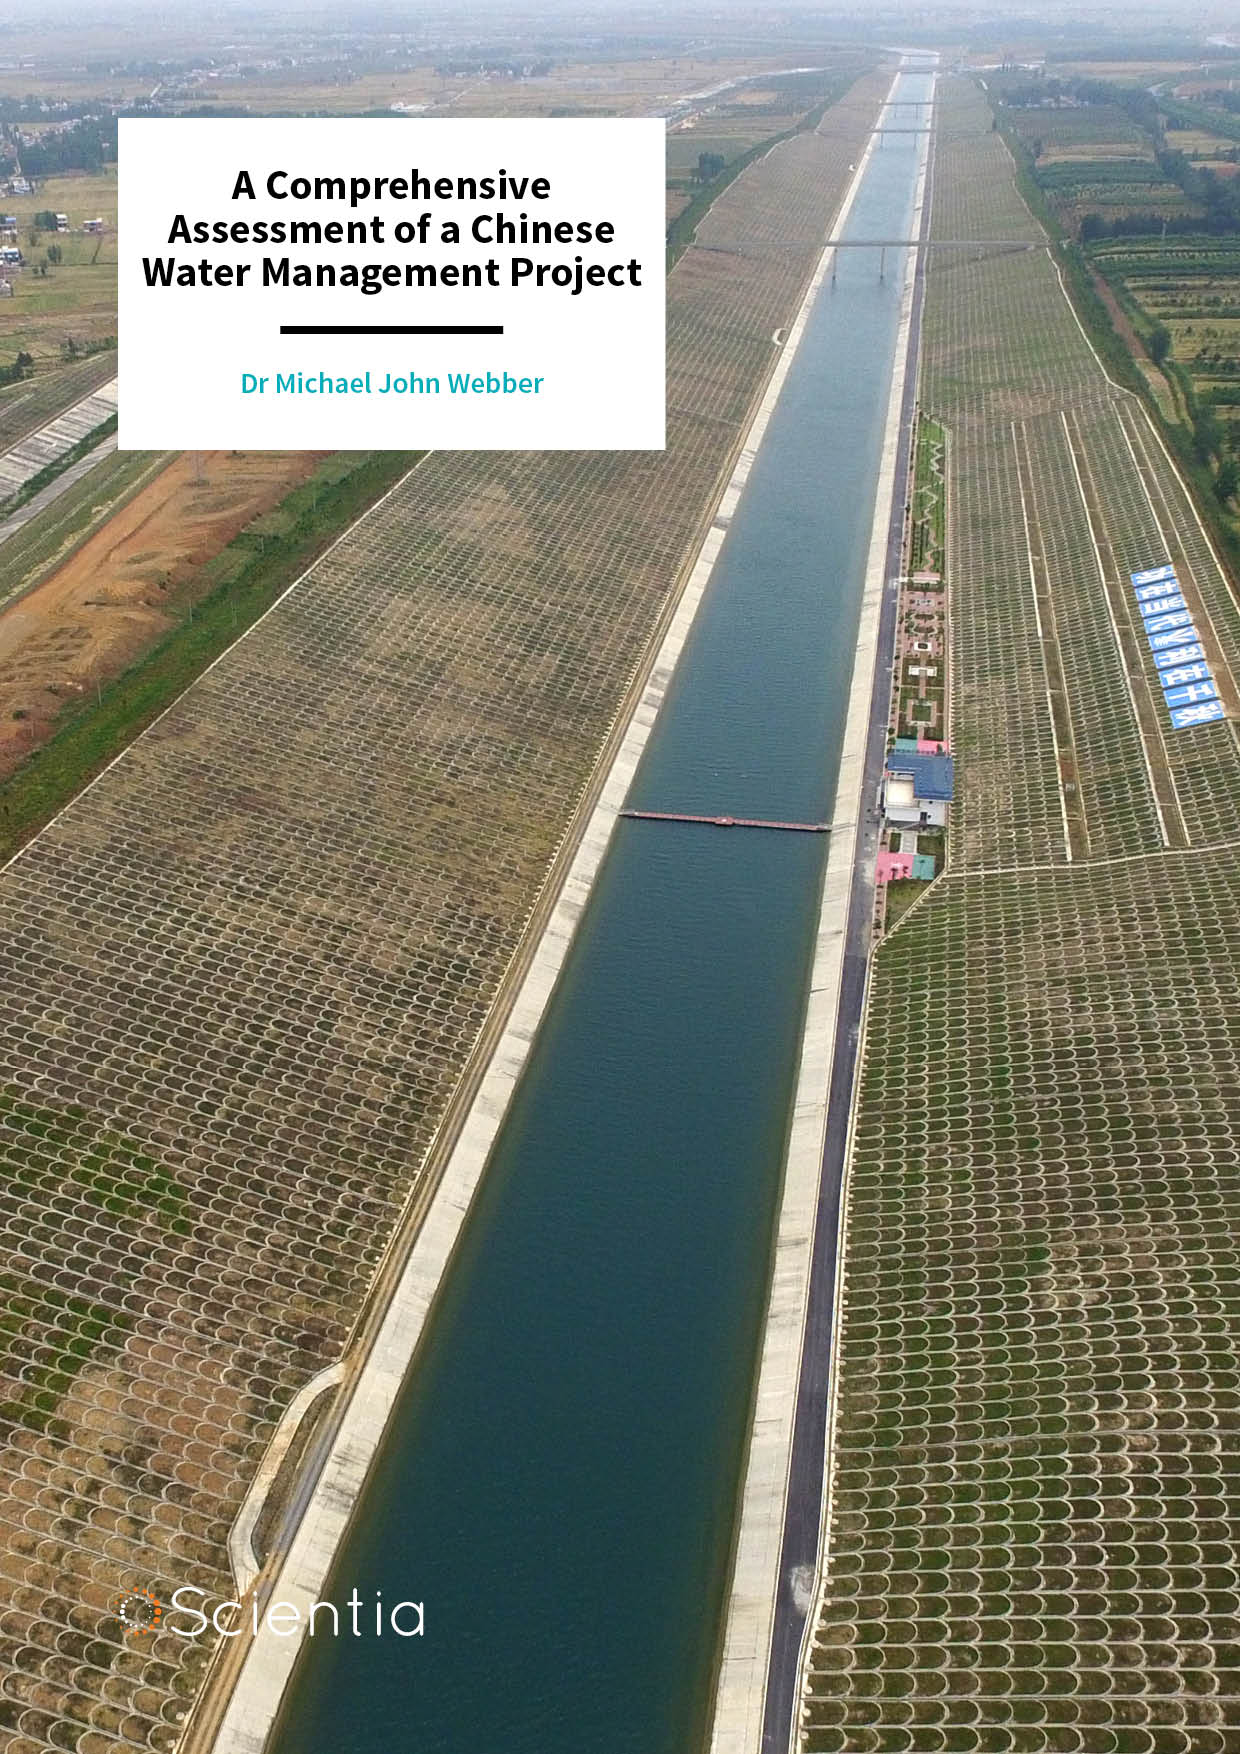 Dr Michael J Webber | A Comprehensive Assessment of a Chinese Water Management Project